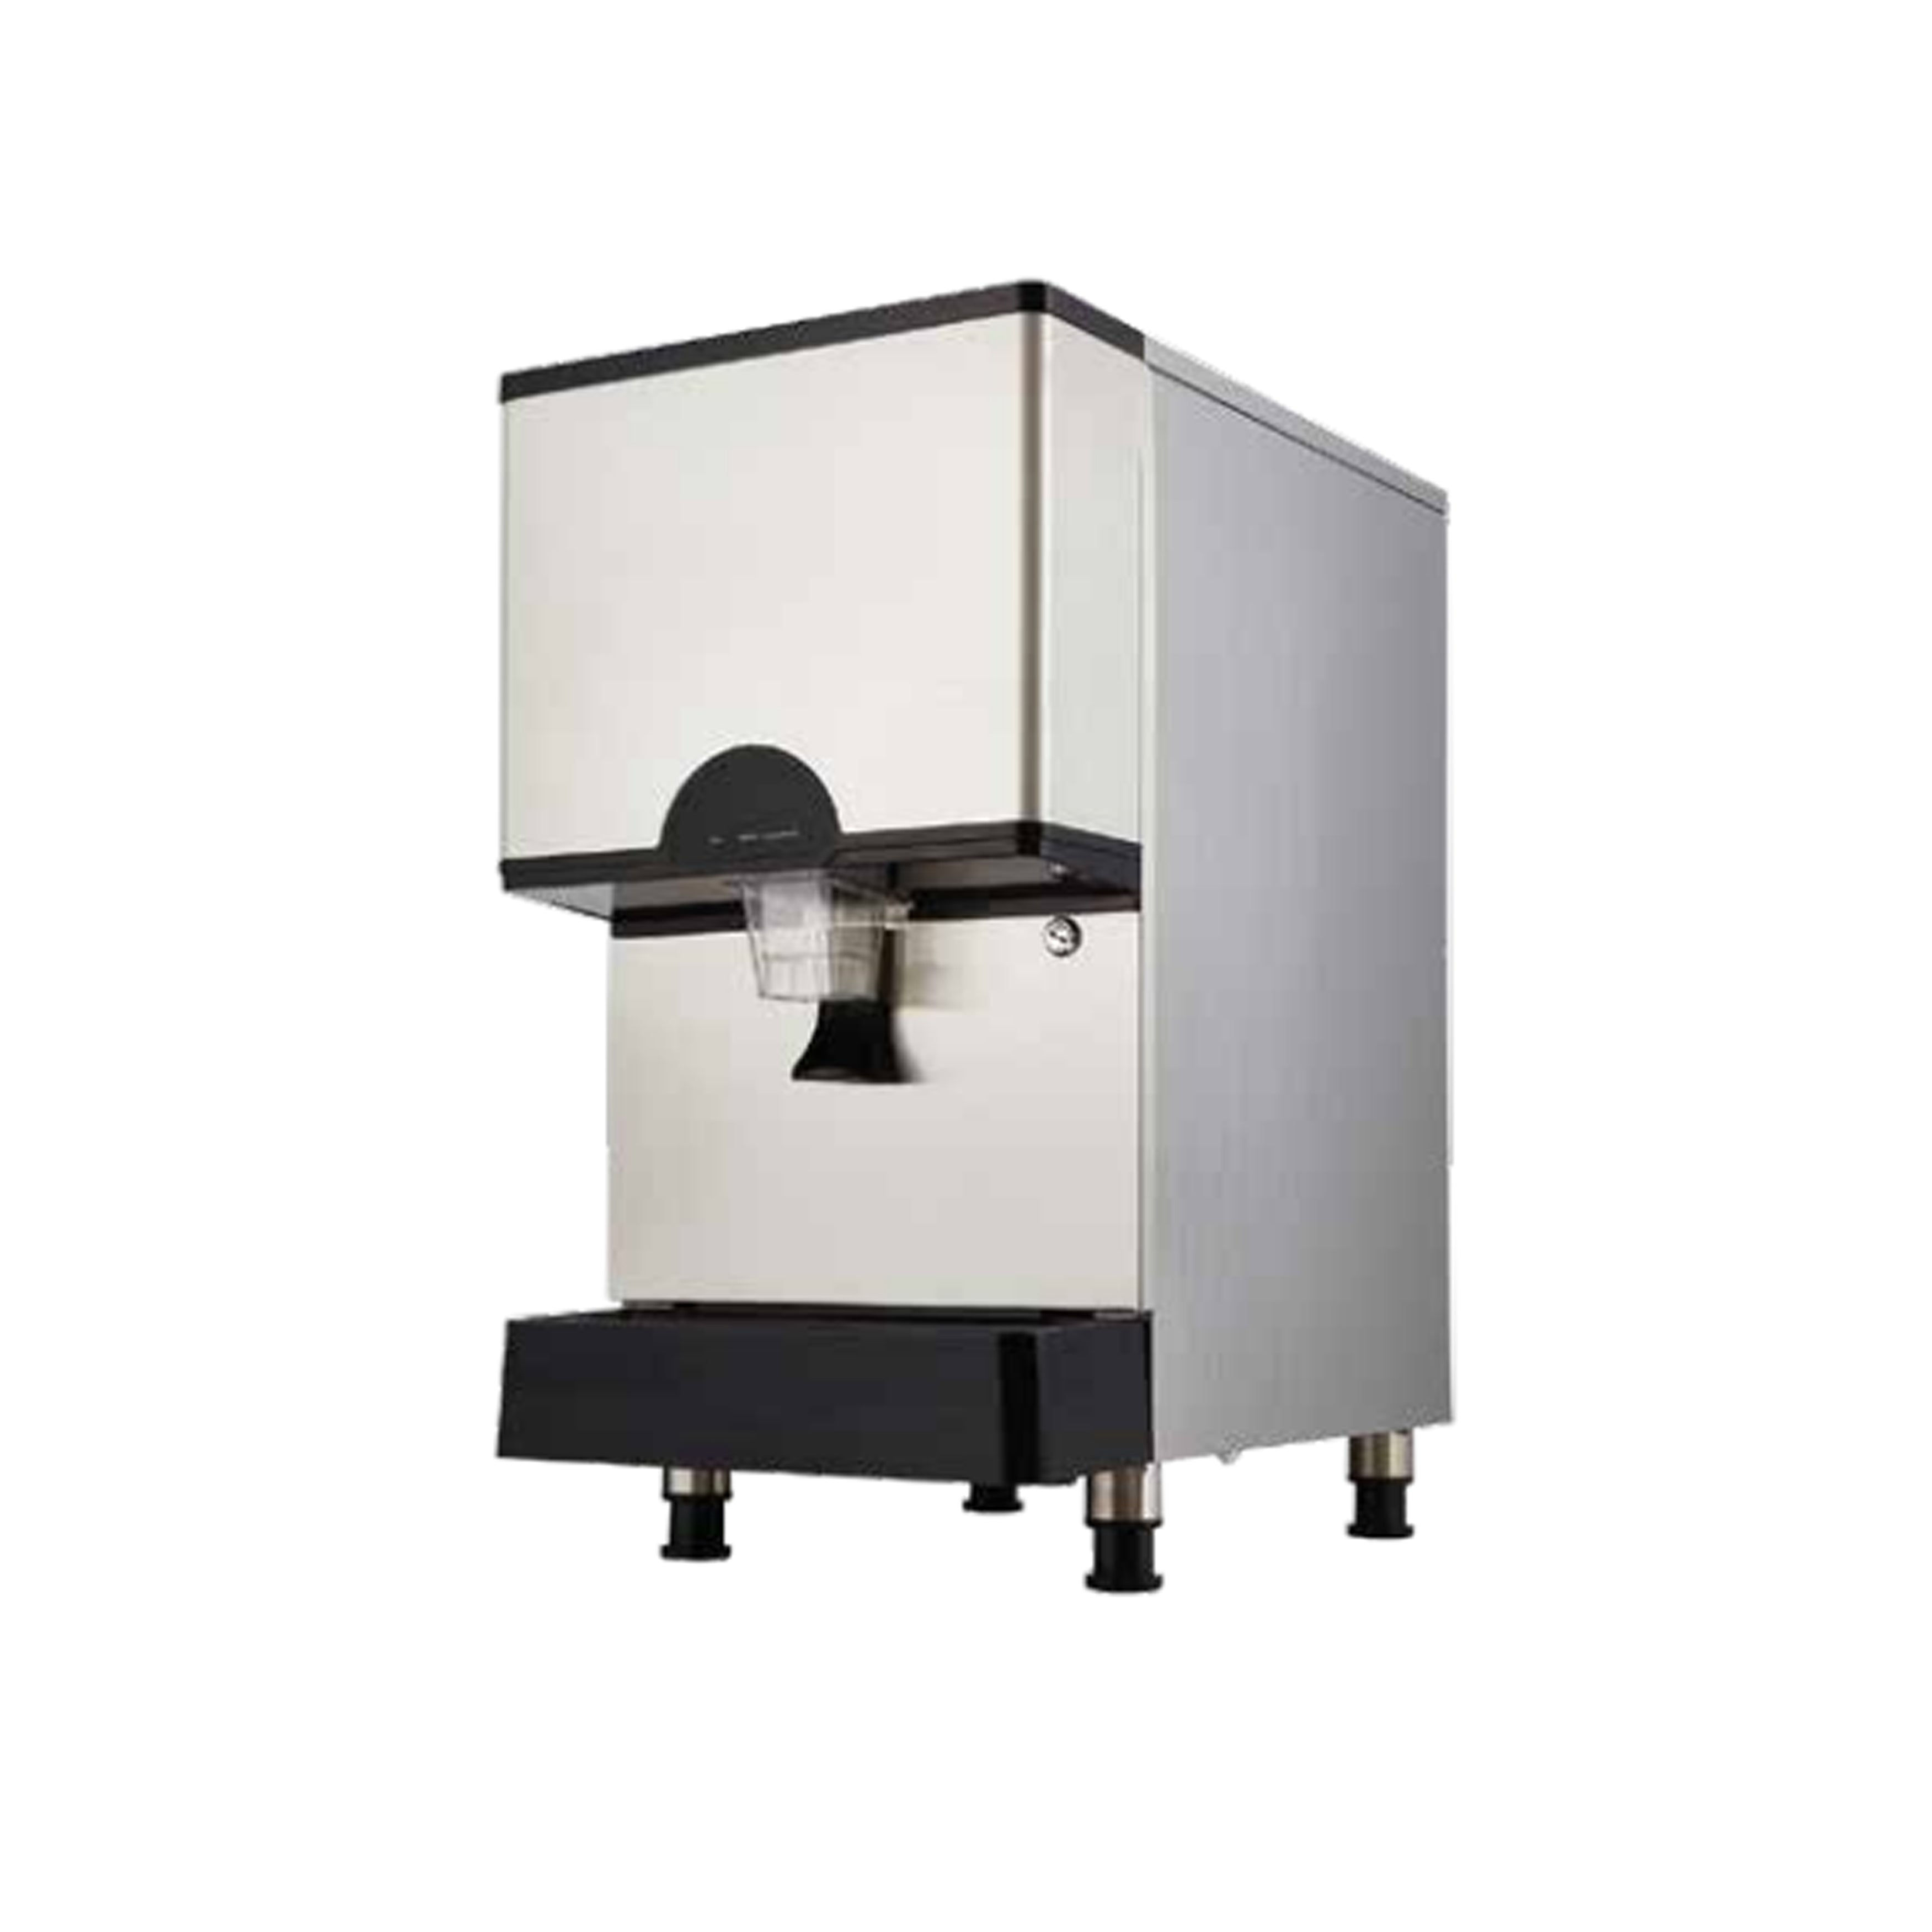 Icetro - ID-0300-AN, Commercial Air Cooled ice and Water Dispenser Nugget Ice Maker 282lbs